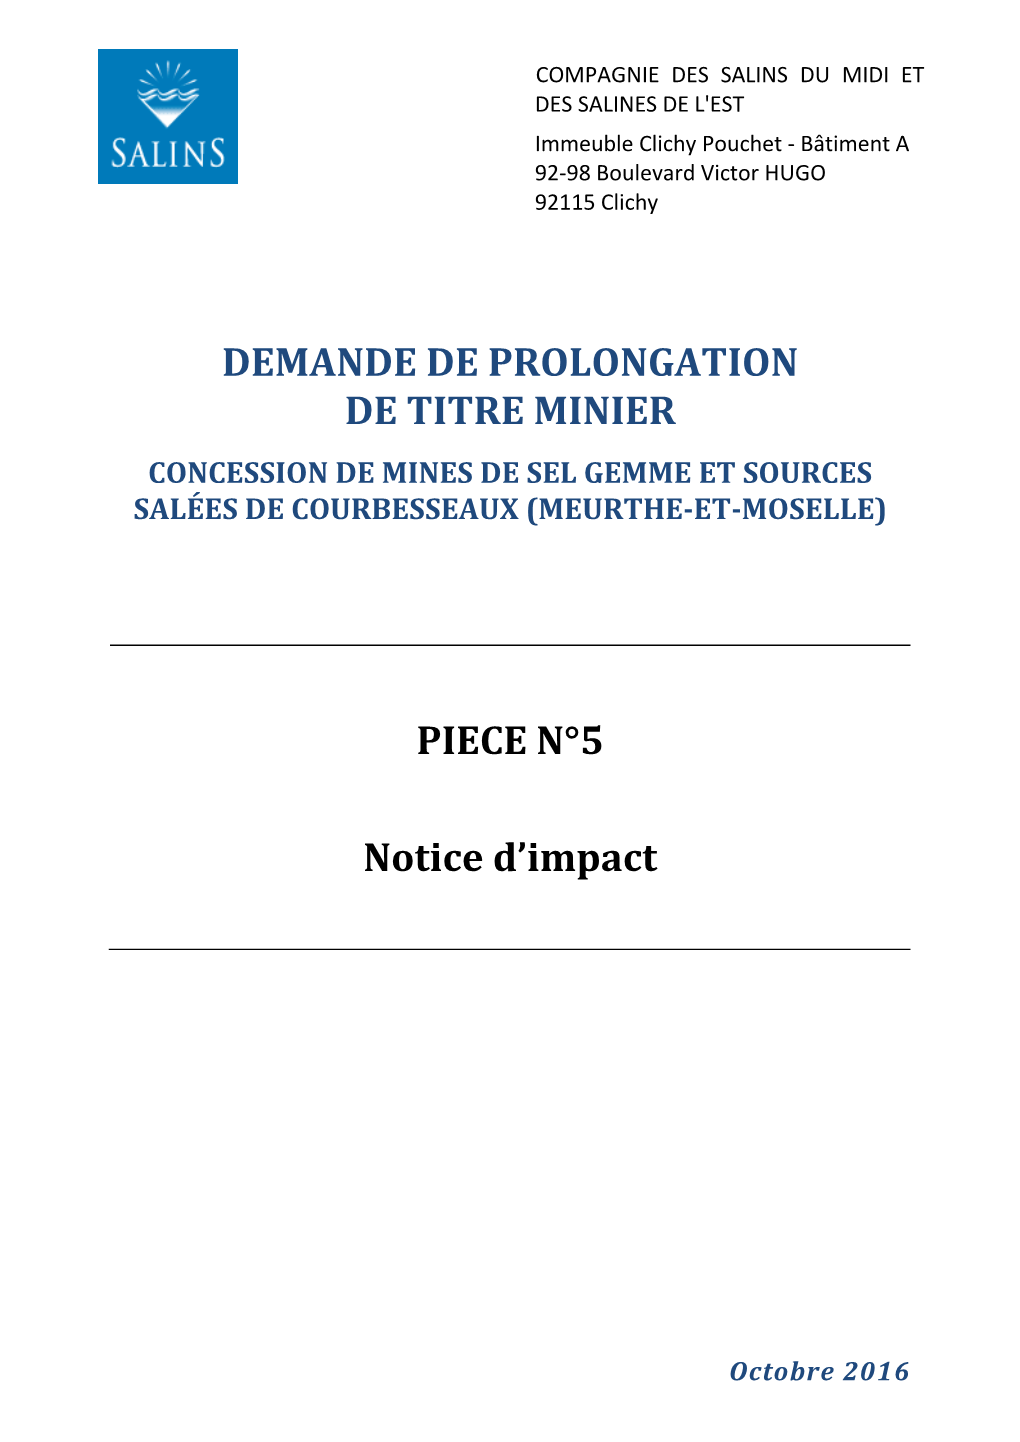 Dossier Initial Piece N°5 (Notice D'impact)